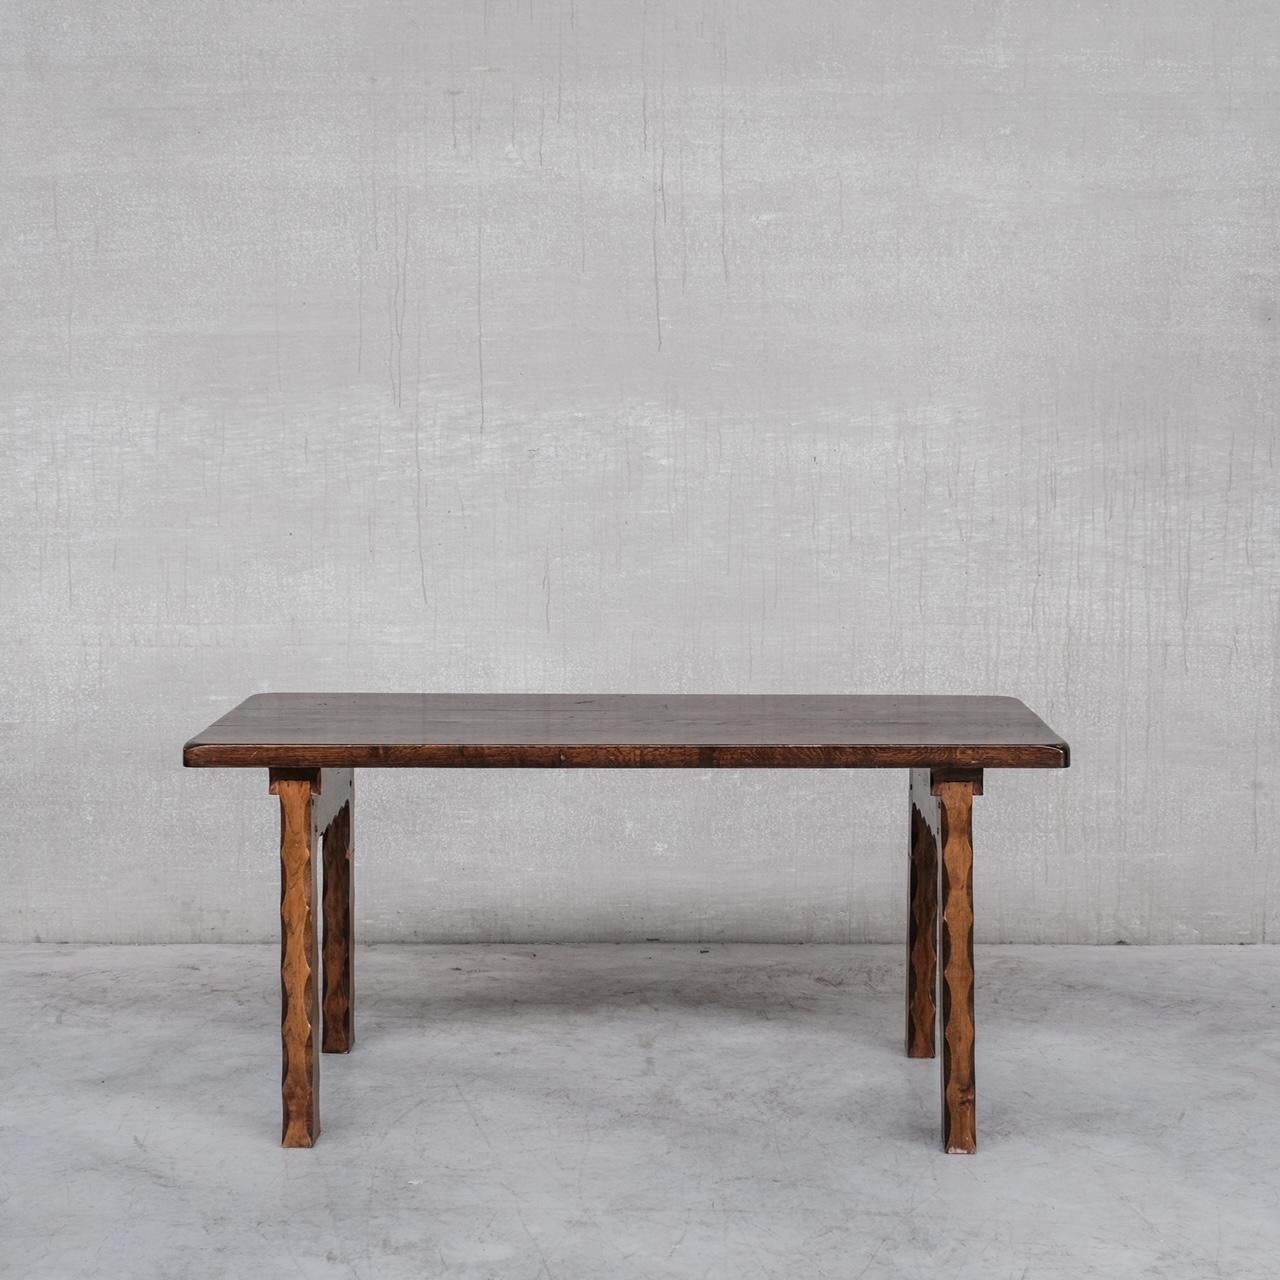 An oak brutalist dining table. 

Holland, c1970s. 

Particuarly great carved curved legs to the piece. 

Remains in good condition, some scuffs and wear commensurate with age. 

Location: Belgium Gallery.

Dimensions: 165 W x 76 D x 77.5 H